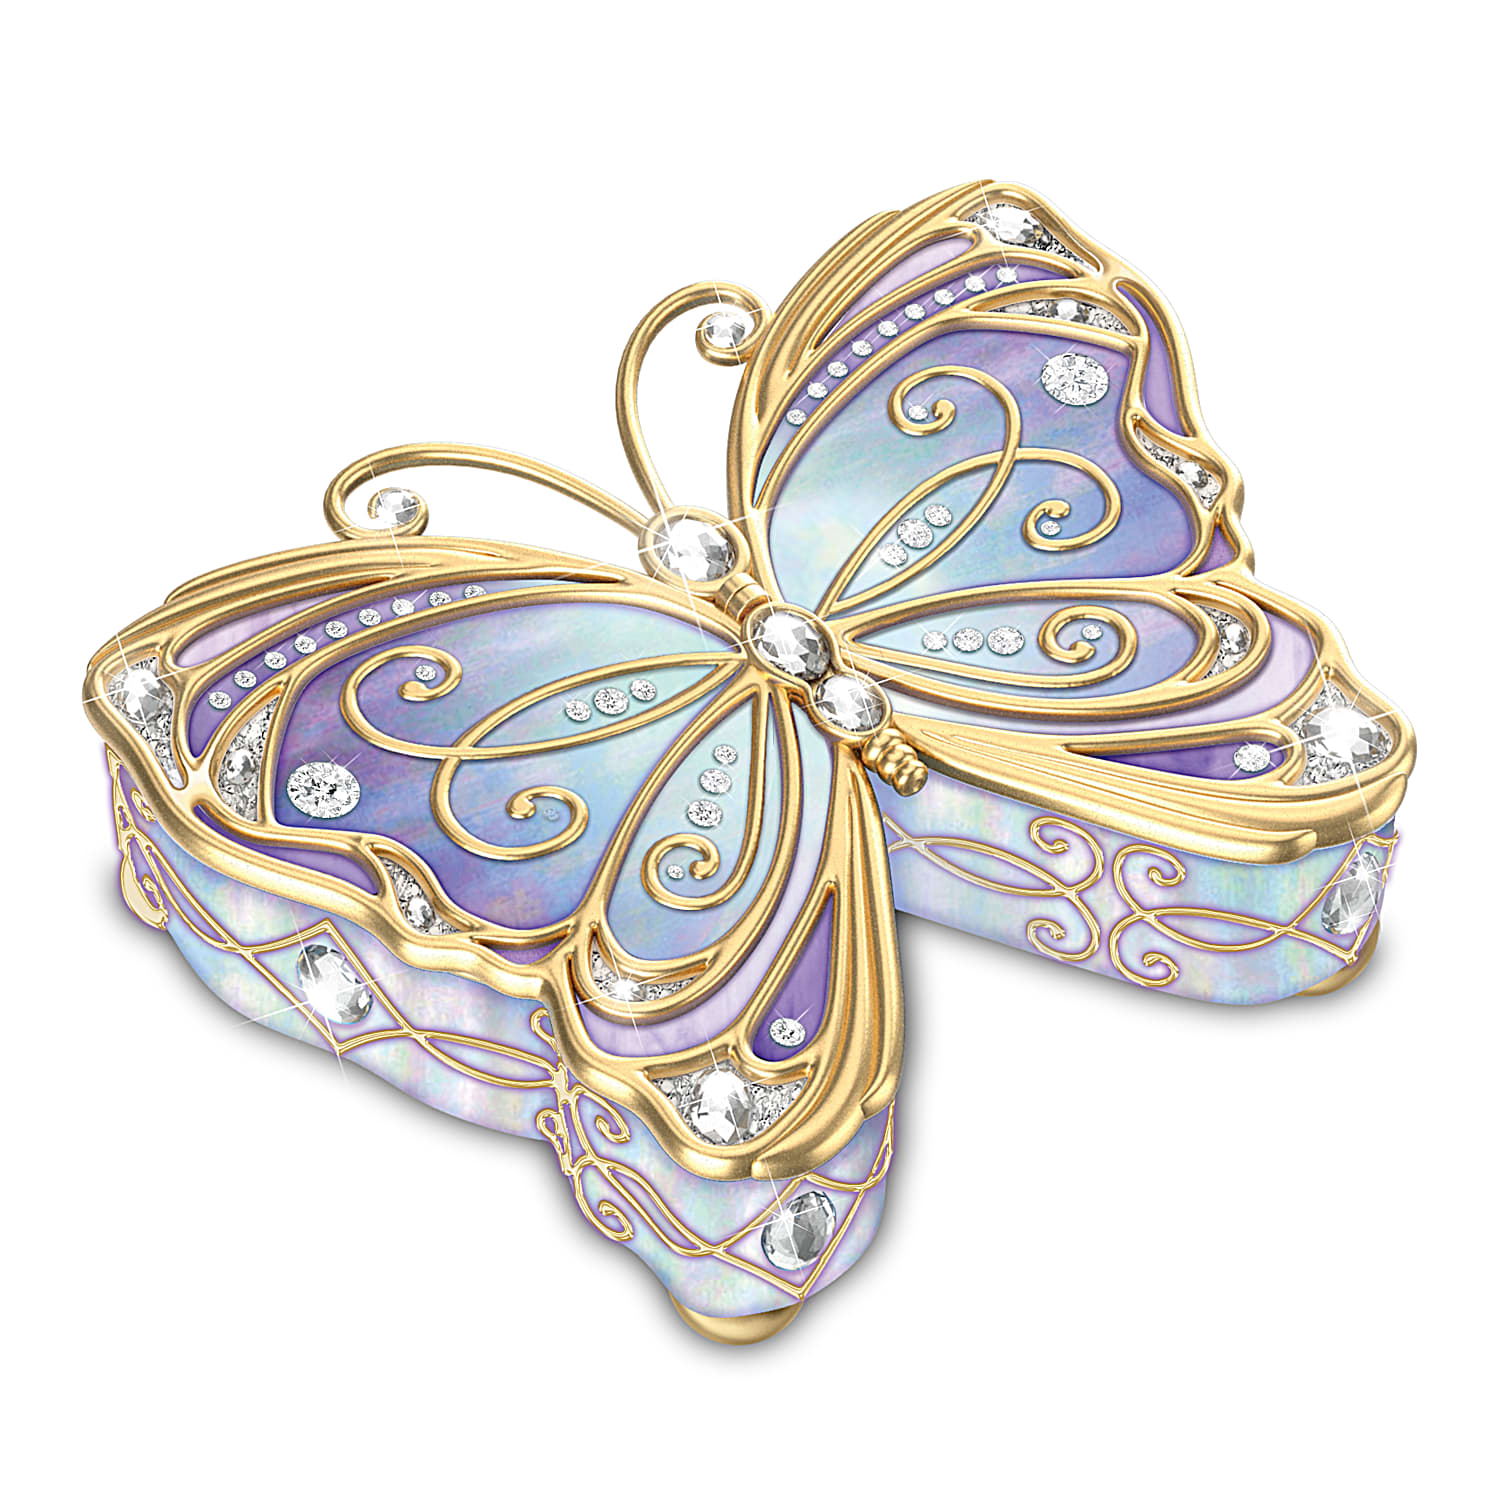 Precious Jewel To Treasure Forever Heirloom Porcelain Butterfly